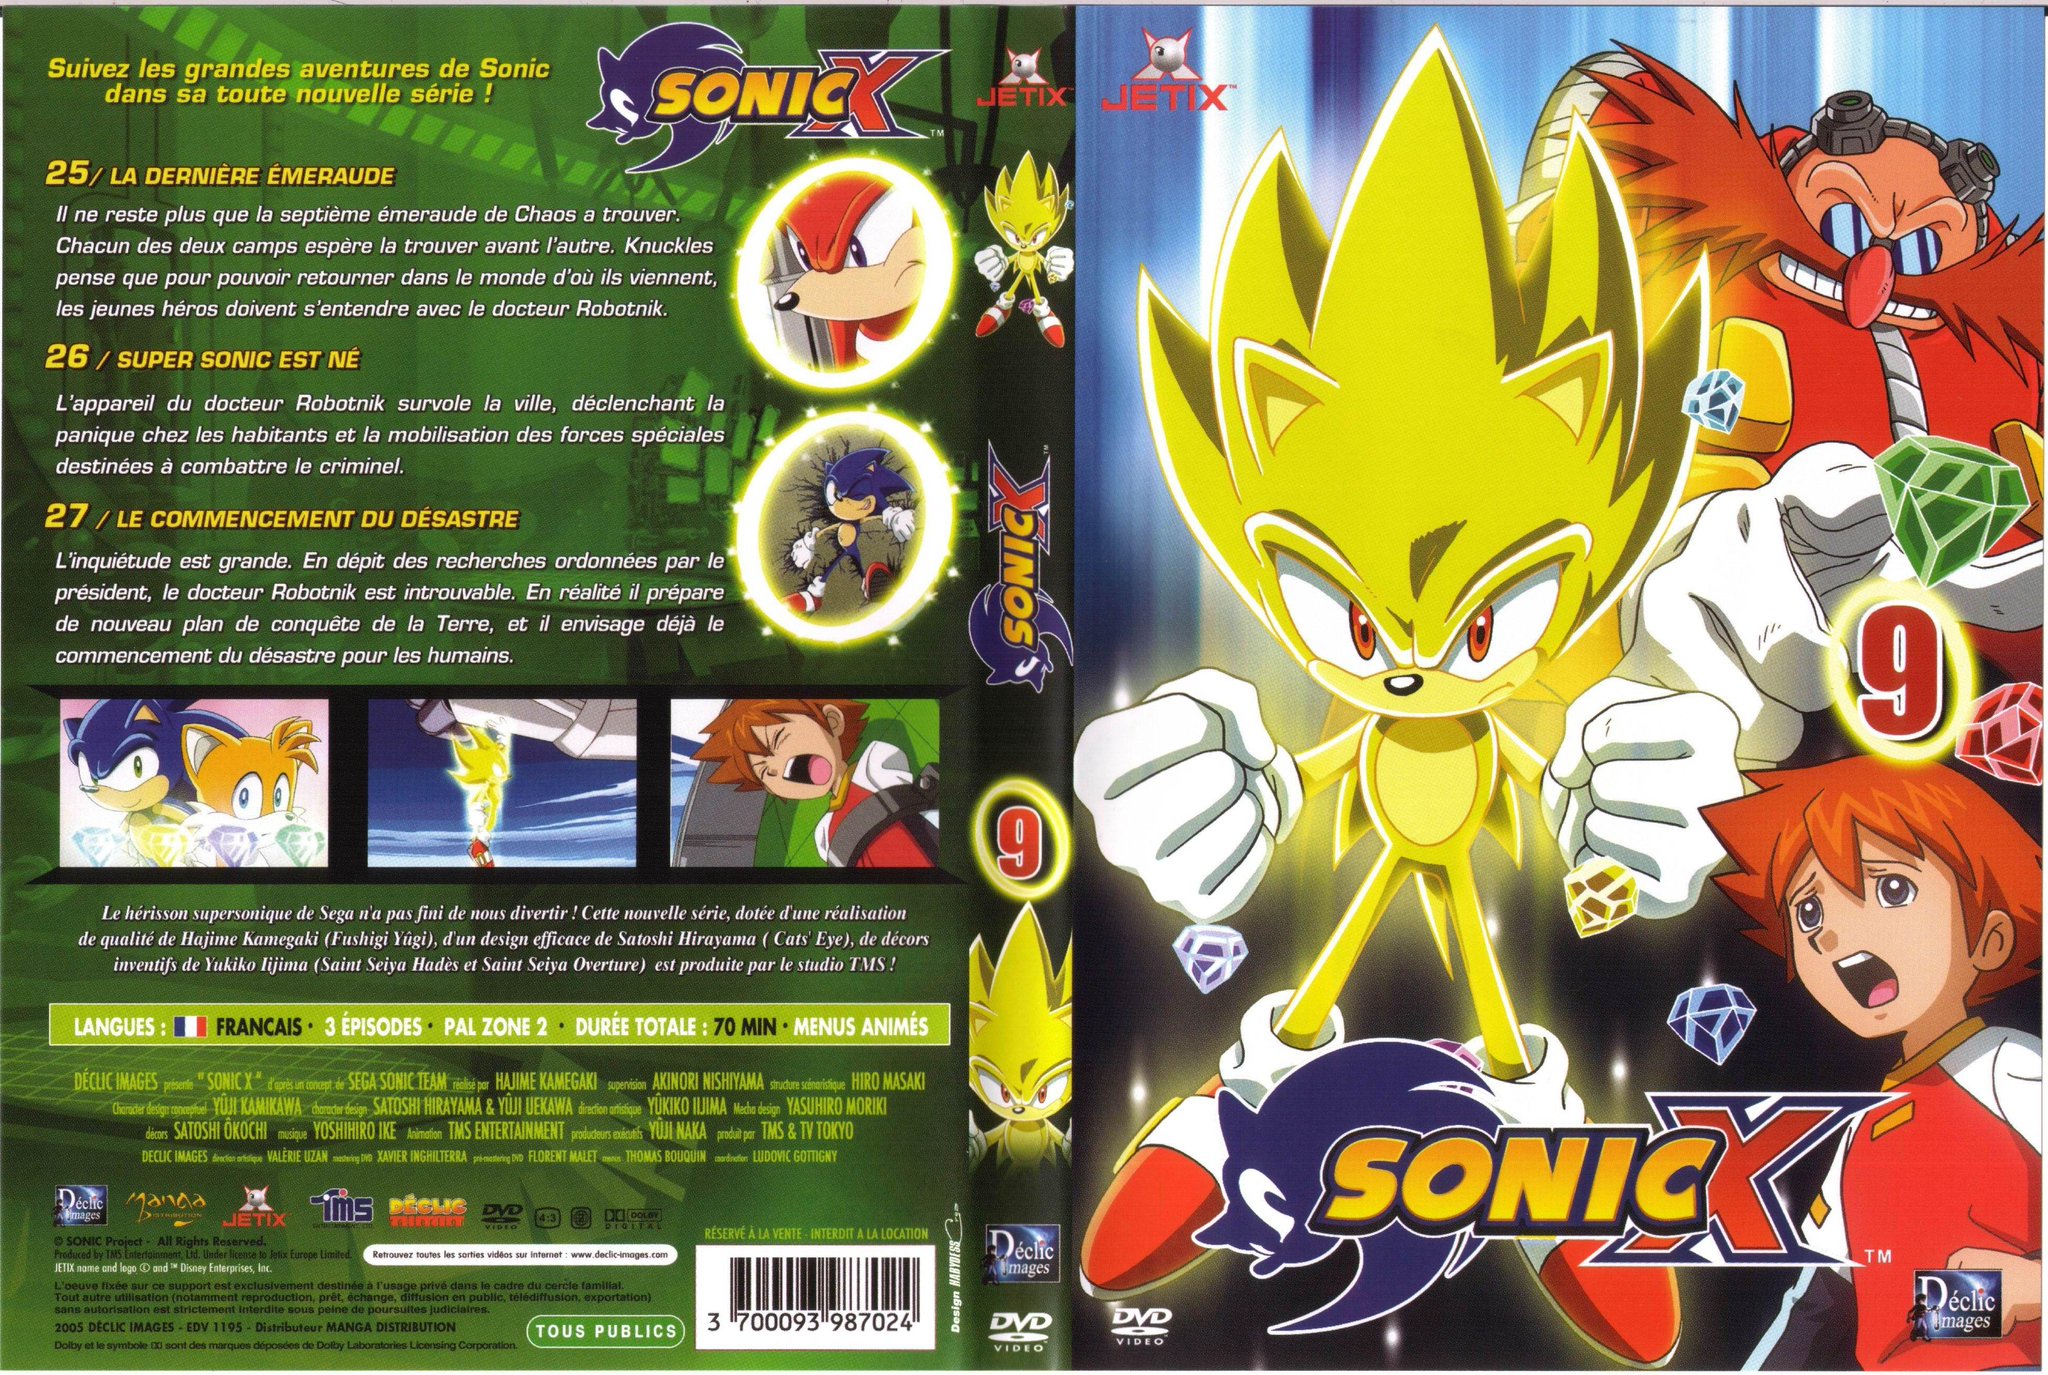 Patmac With The Announcement Of The New Blu Ray Release Of Sonic X Coming Soon It S Time For Me To Once Again Praise How Incredible The French Dvds Of Sonic X